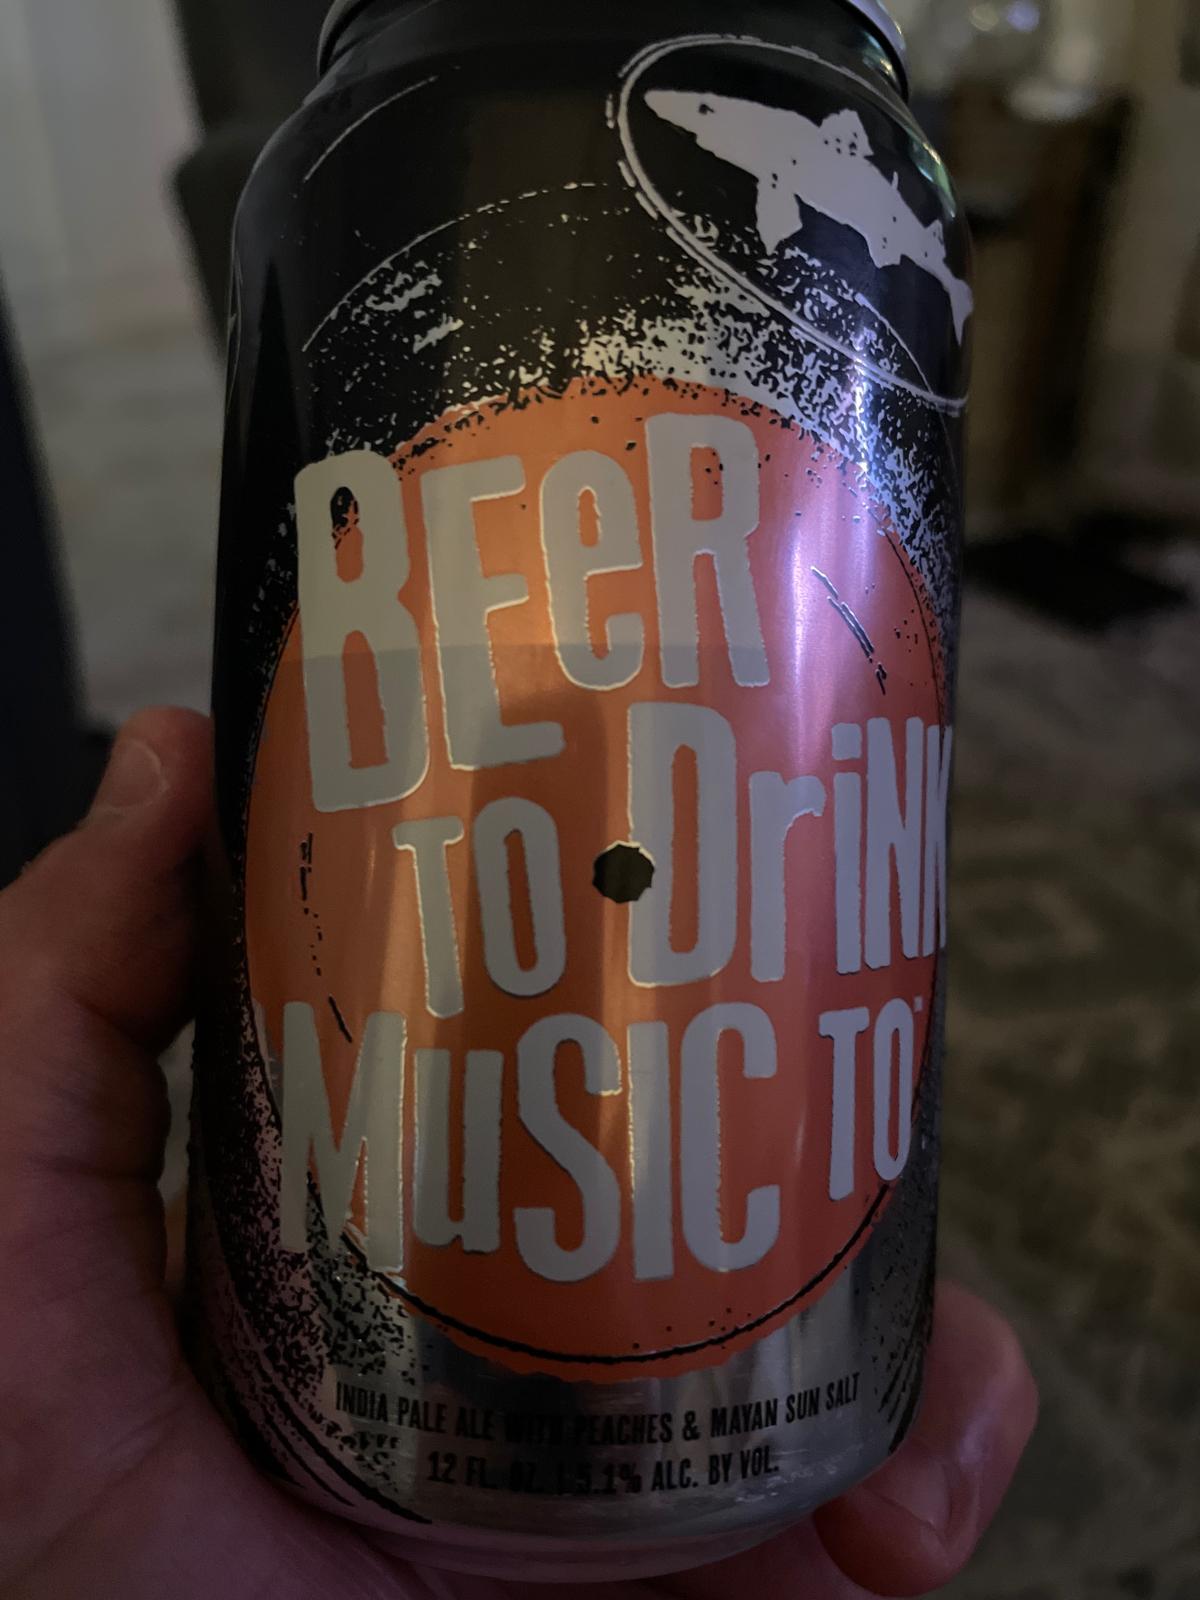 Beer To Drink Music To - IPA with Peaches and Mayan Sun Salt